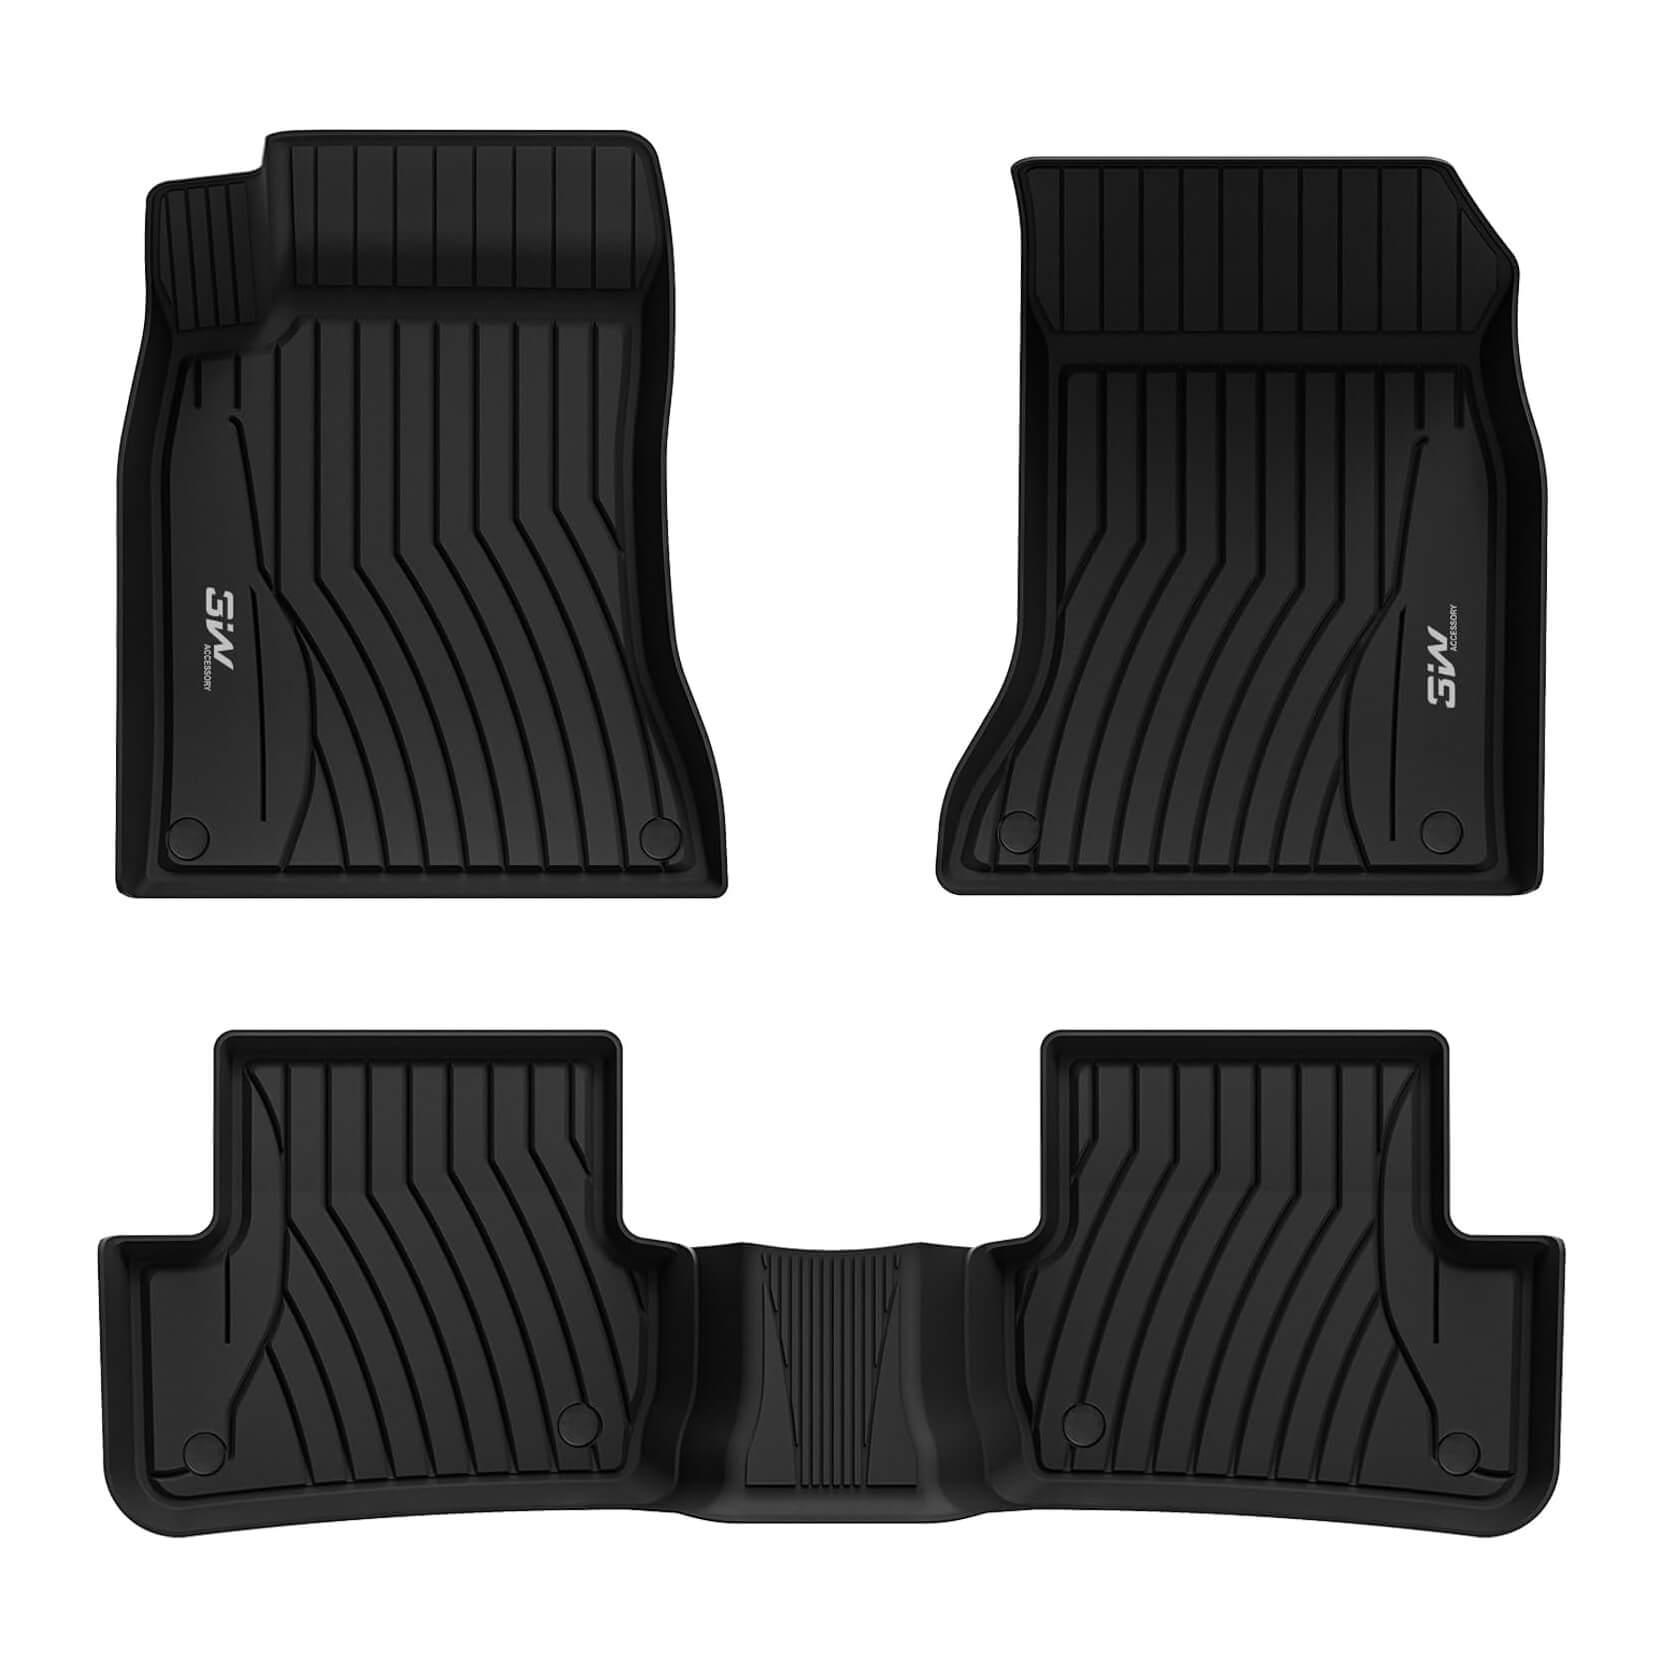 3W Mercedes-Benz CLA 2020-2024 Custom Floor Mats TPE Material & All-Weather Protection Vehicles & Parts 3Wliners 2020-2024 CLA 2020-2024 1st&2nd Row Mats